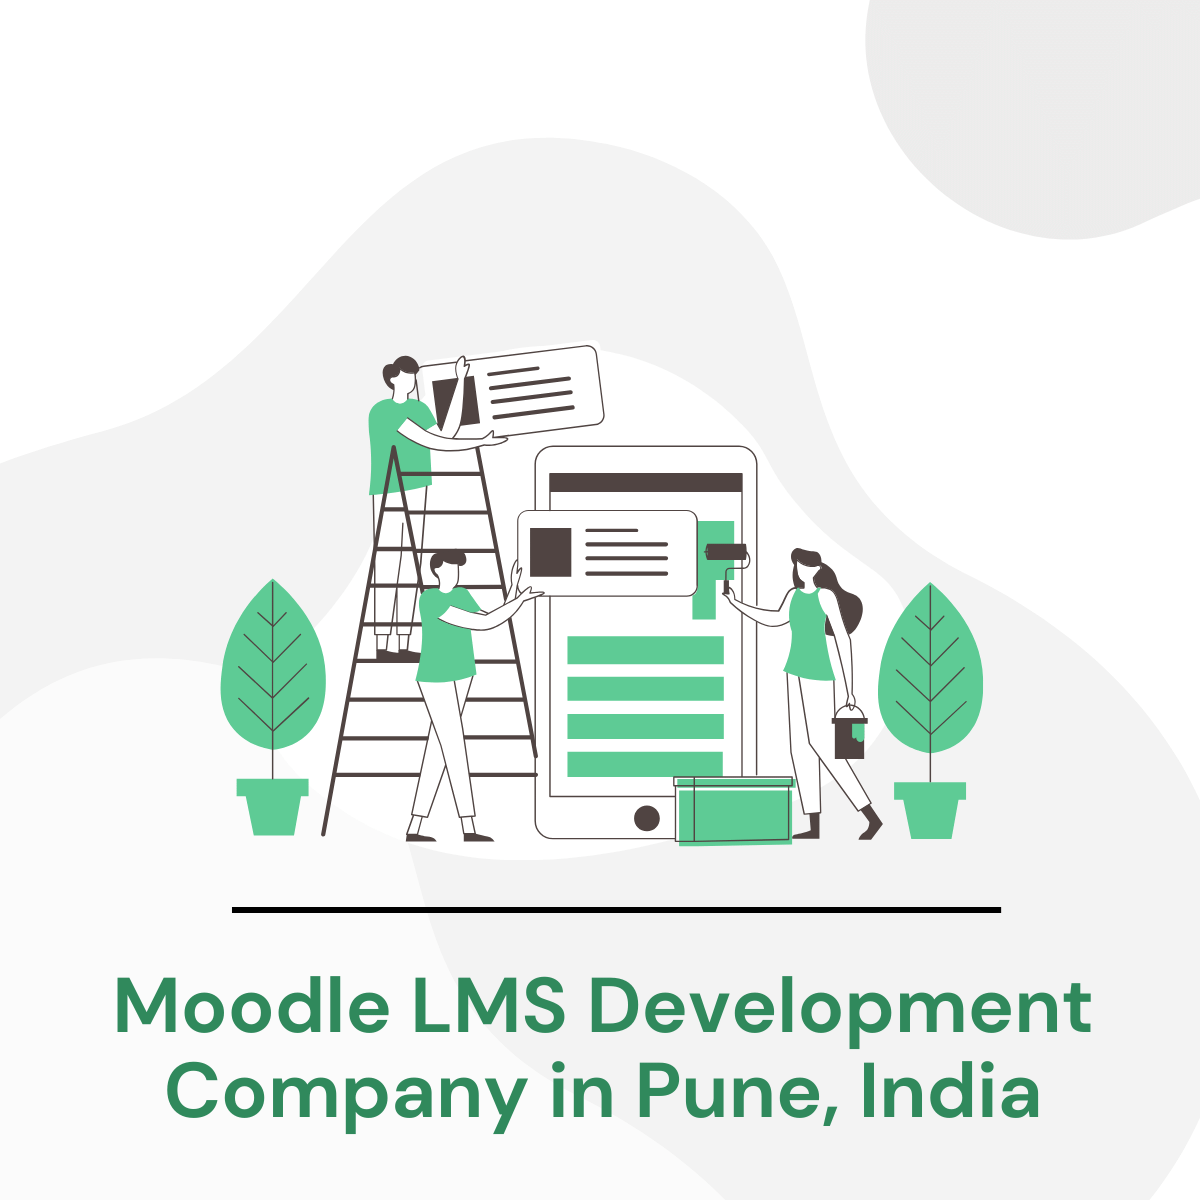 Moodle LMS Development Company in Pune, India